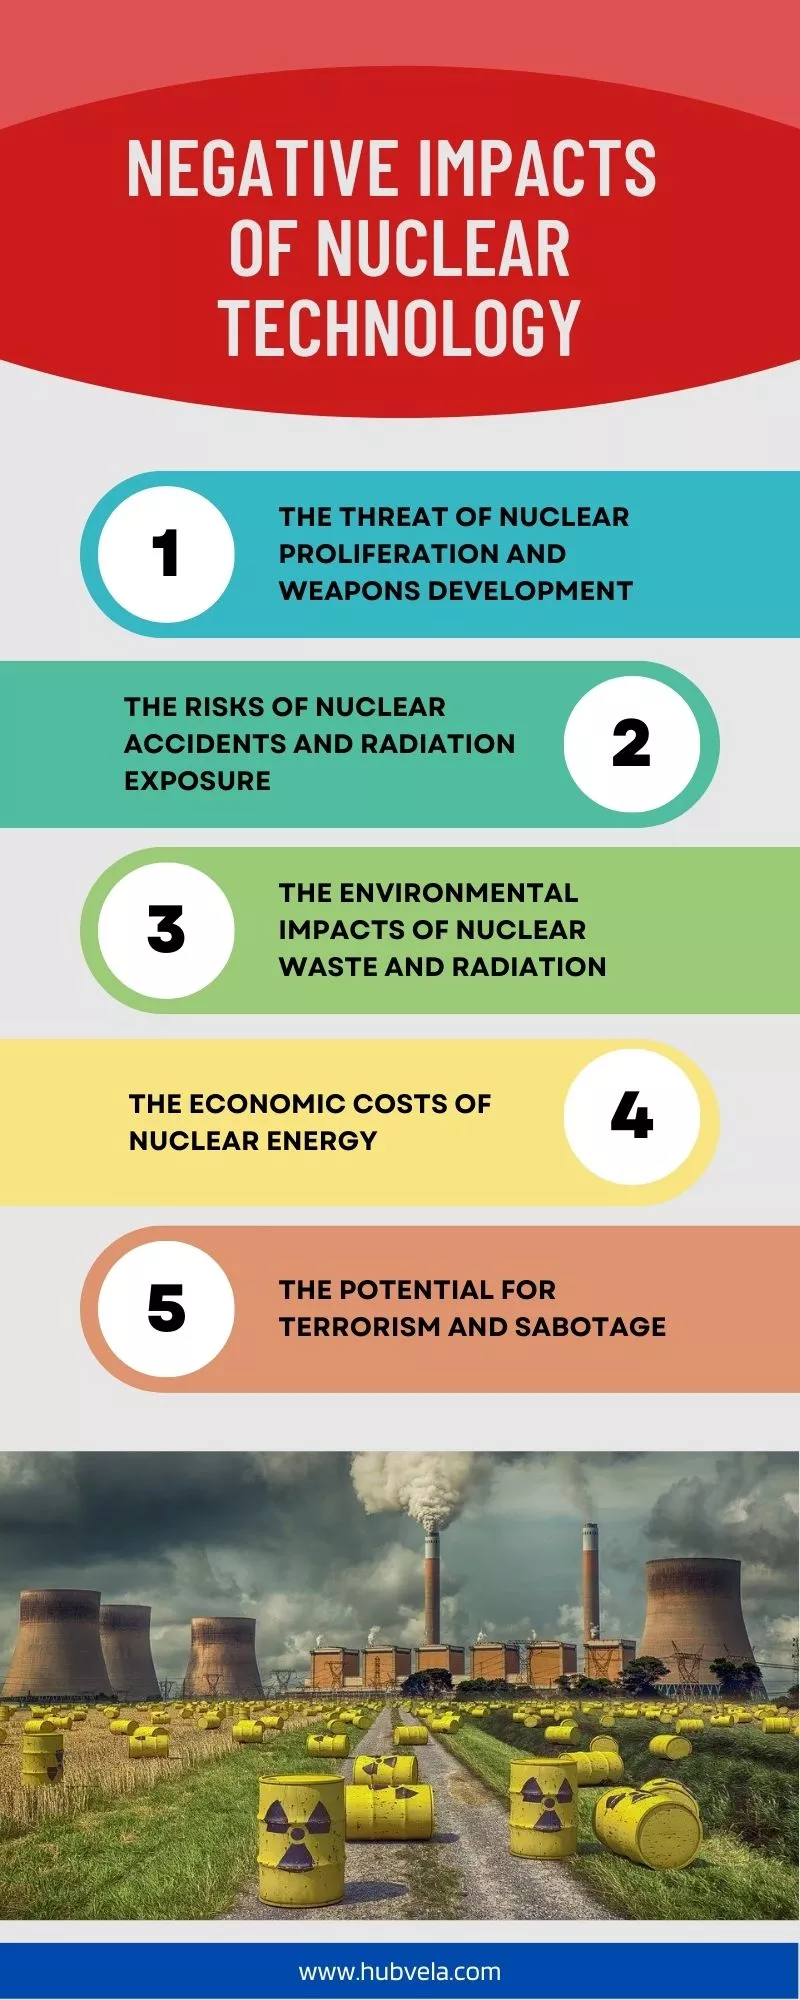 Negative Impacts of Nuclear Technology infographic